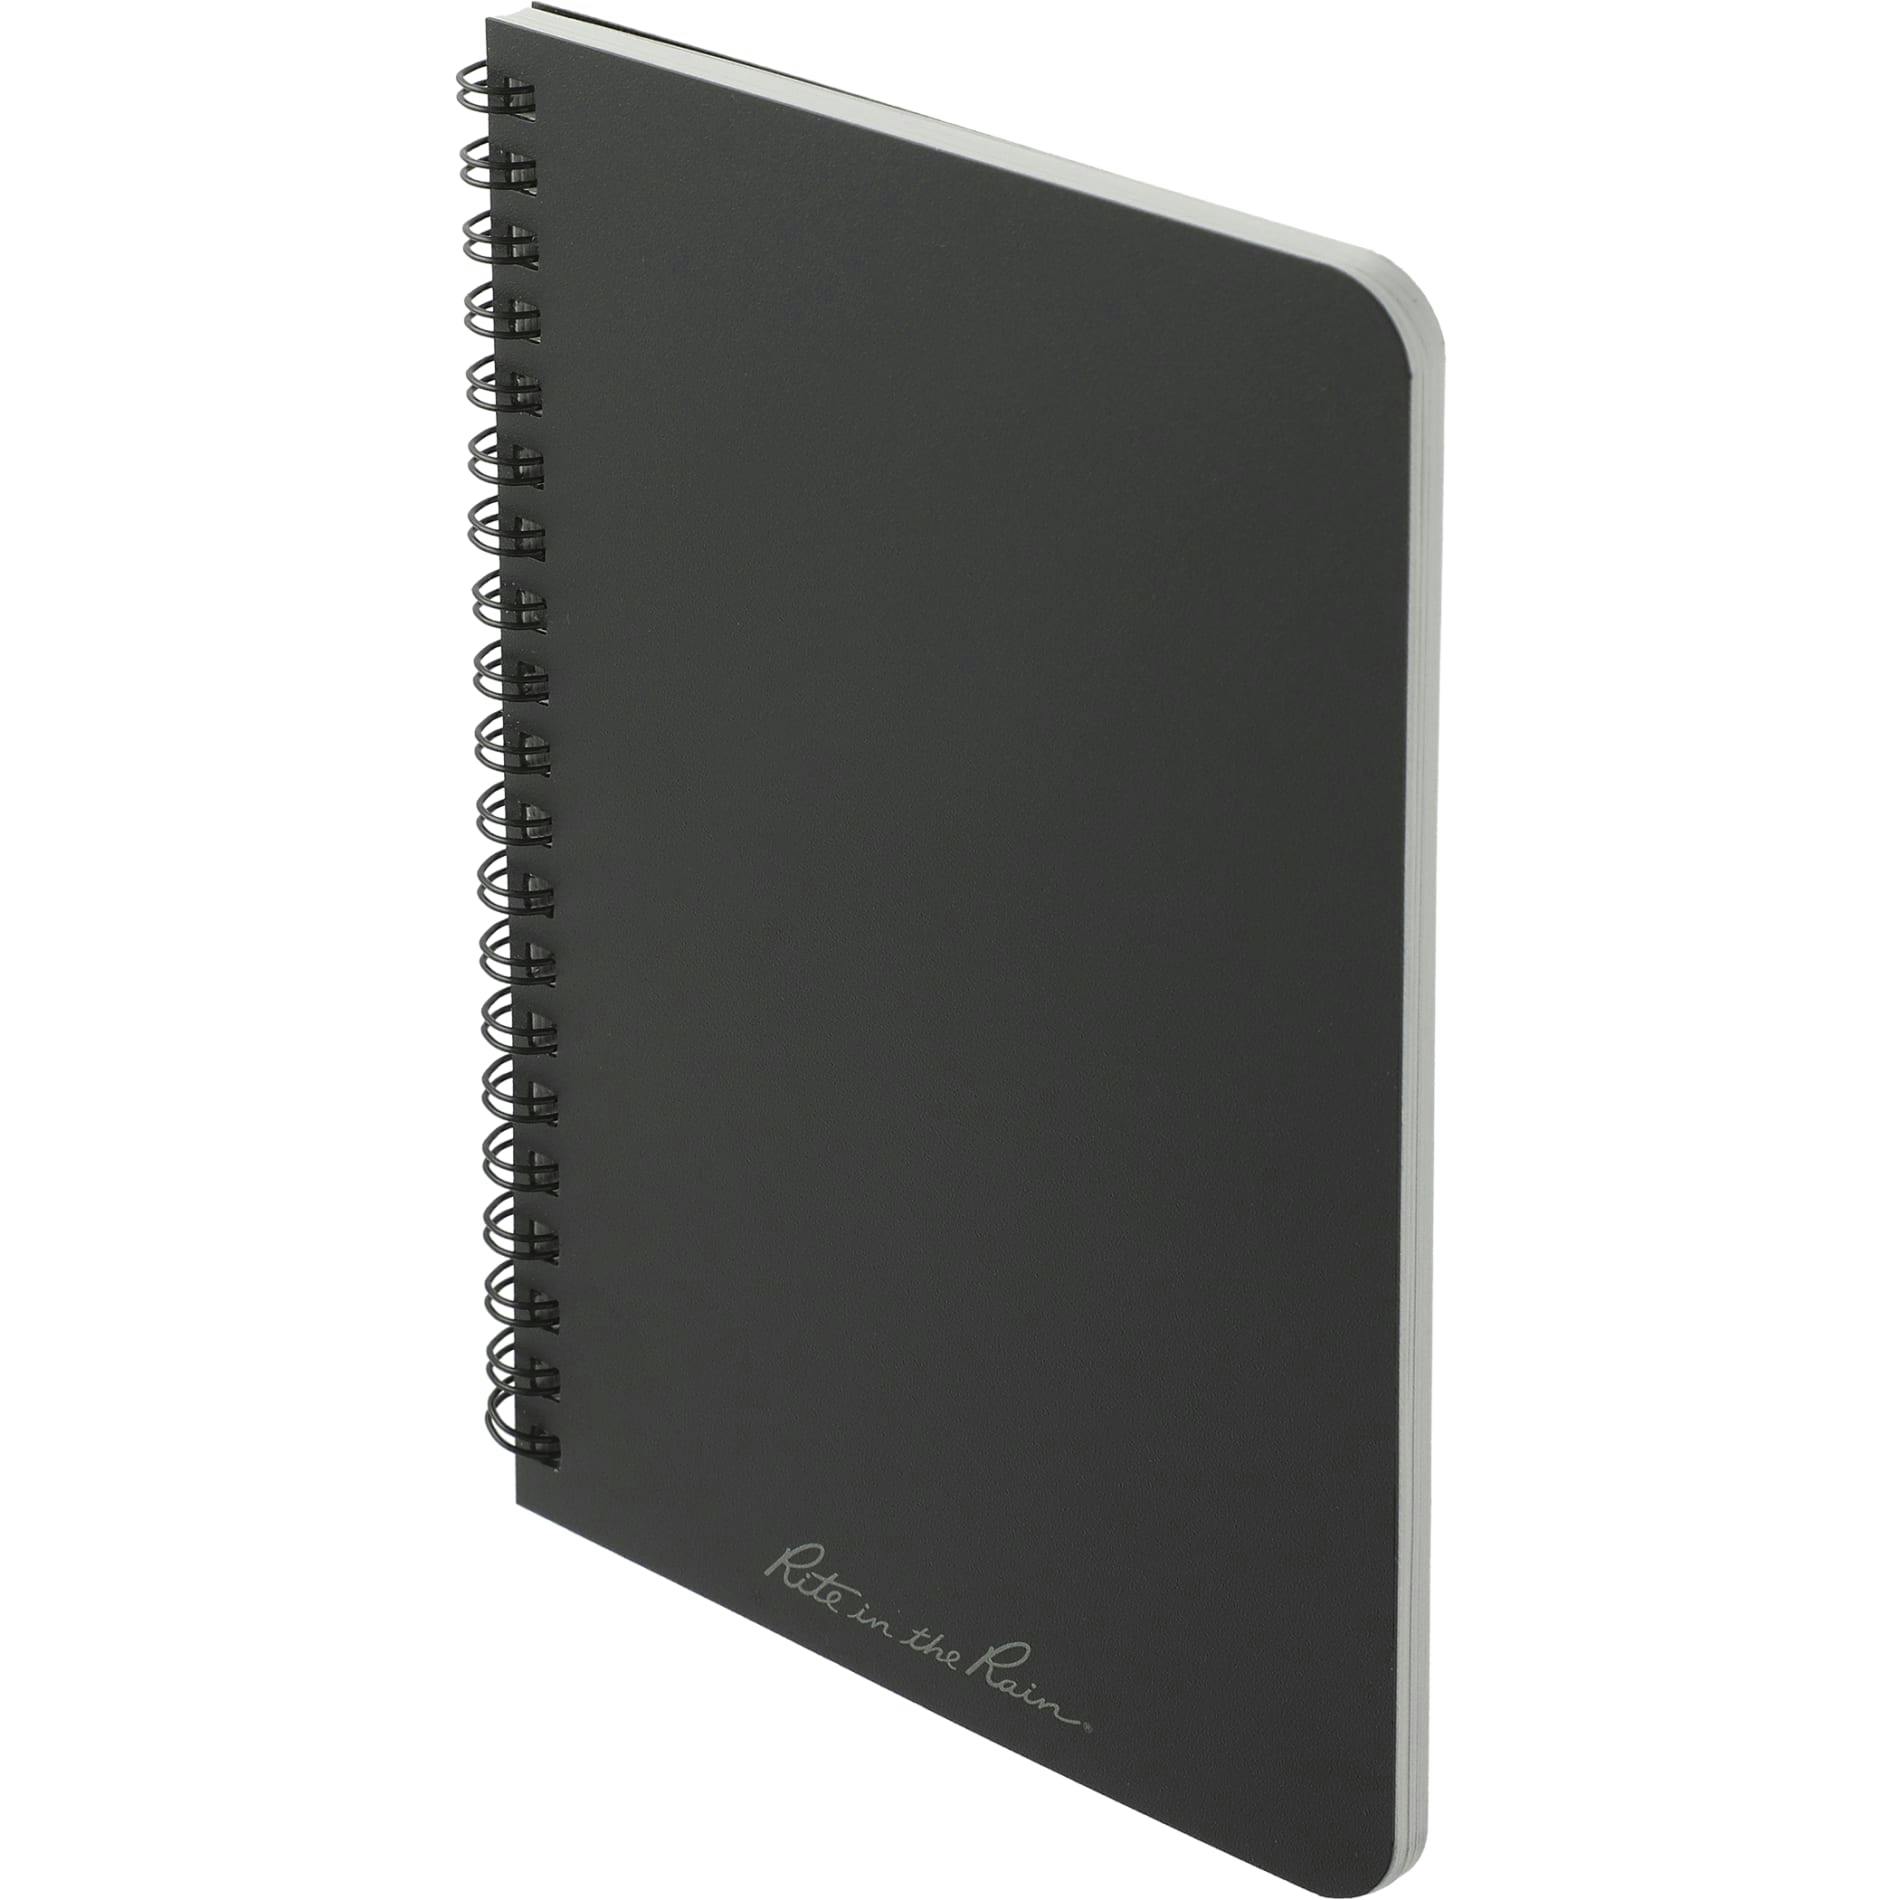 4.6” x 7” Rite in the Rain Side Spiral Notebook - additional Image 6